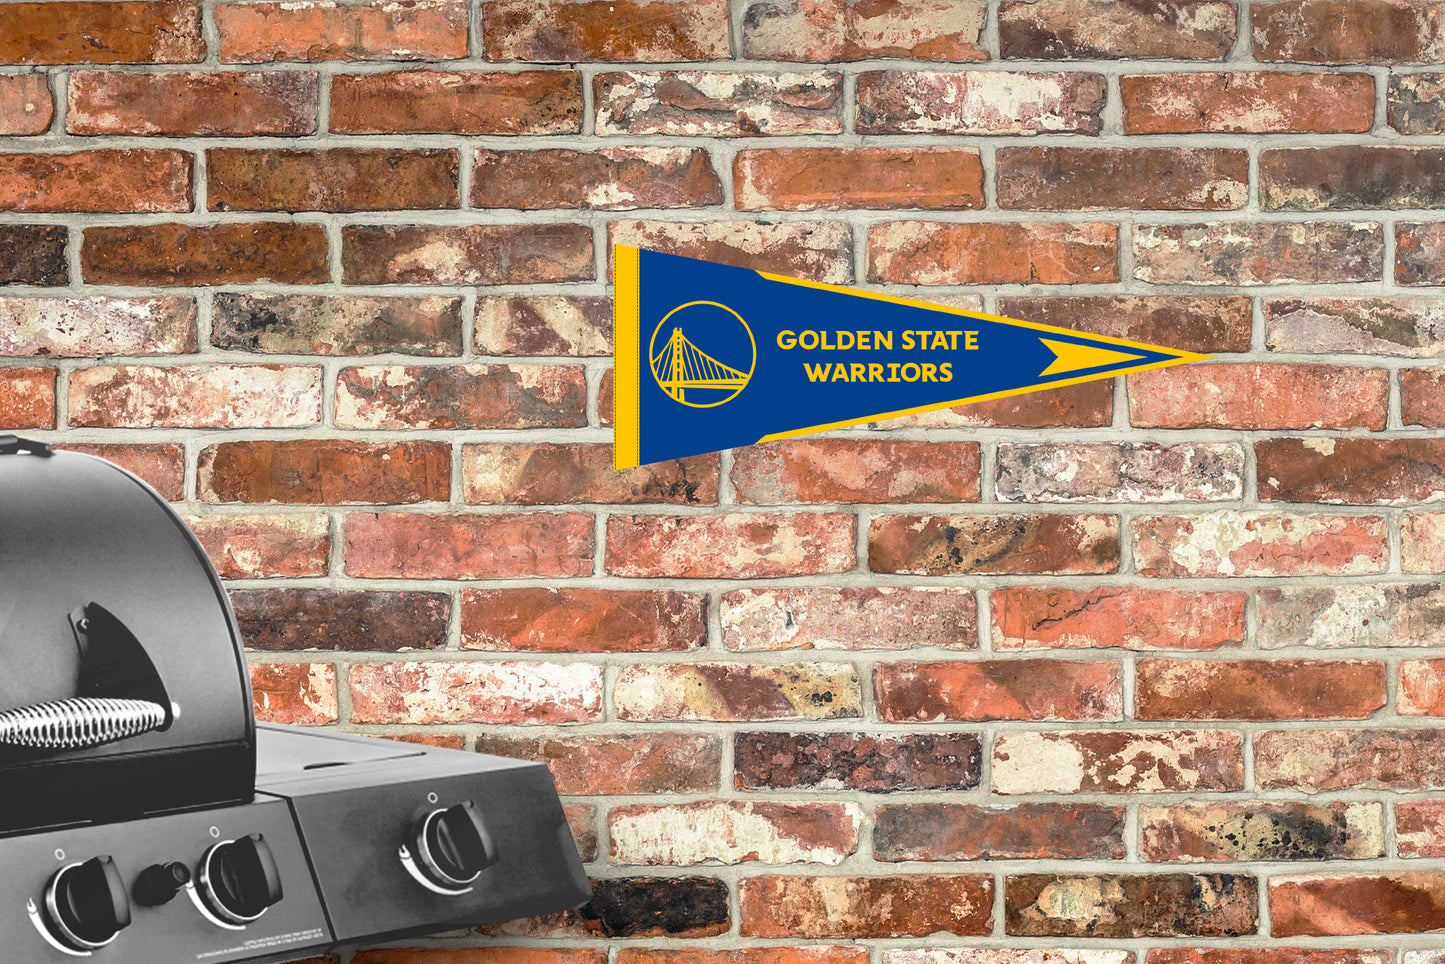 Golden State Warriors: Pennant - Officially Licensed NBA Outdoor Graphic